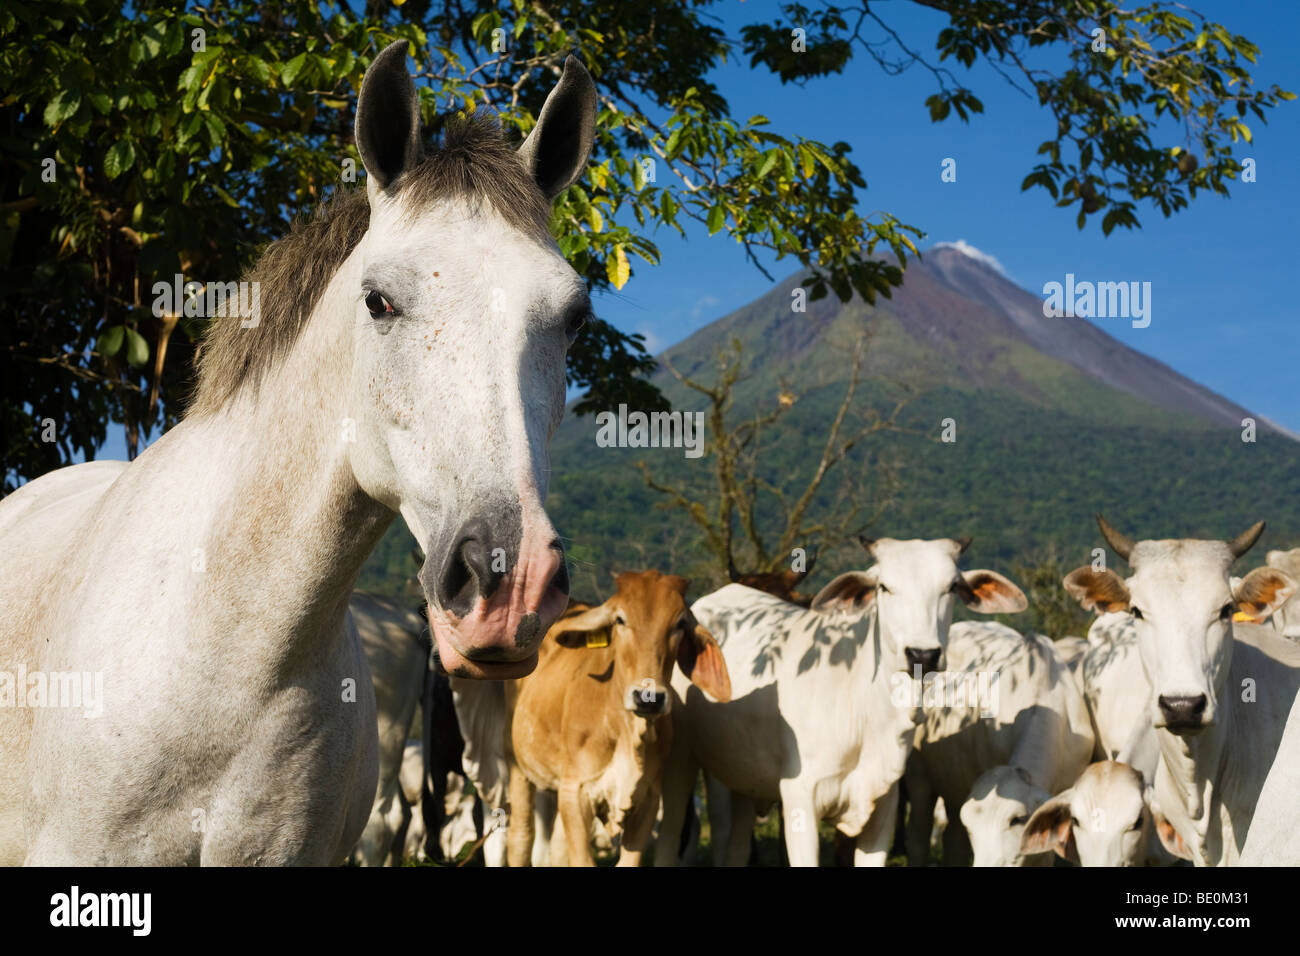 A herd of farm animals with Arenal Volcano in the background Stock Photo